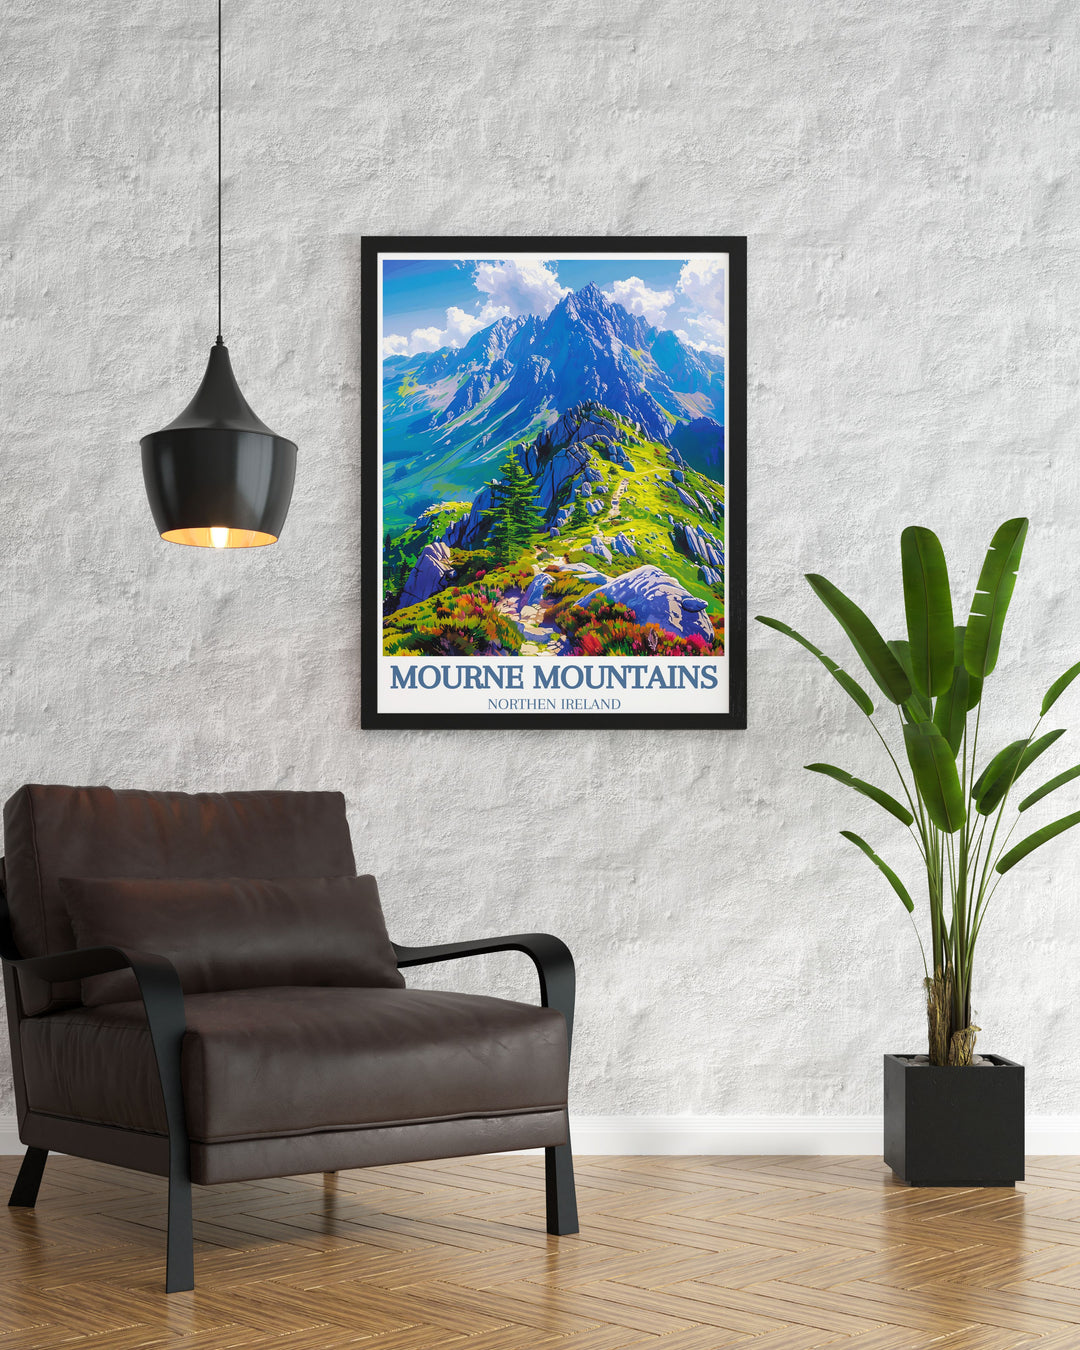 Showcasing both the Mourne Mountains and charming villages, this travel poster captures the unique blend of majestic landscapes and cozy village life, perfect for enhancing your living space with Irish charm.